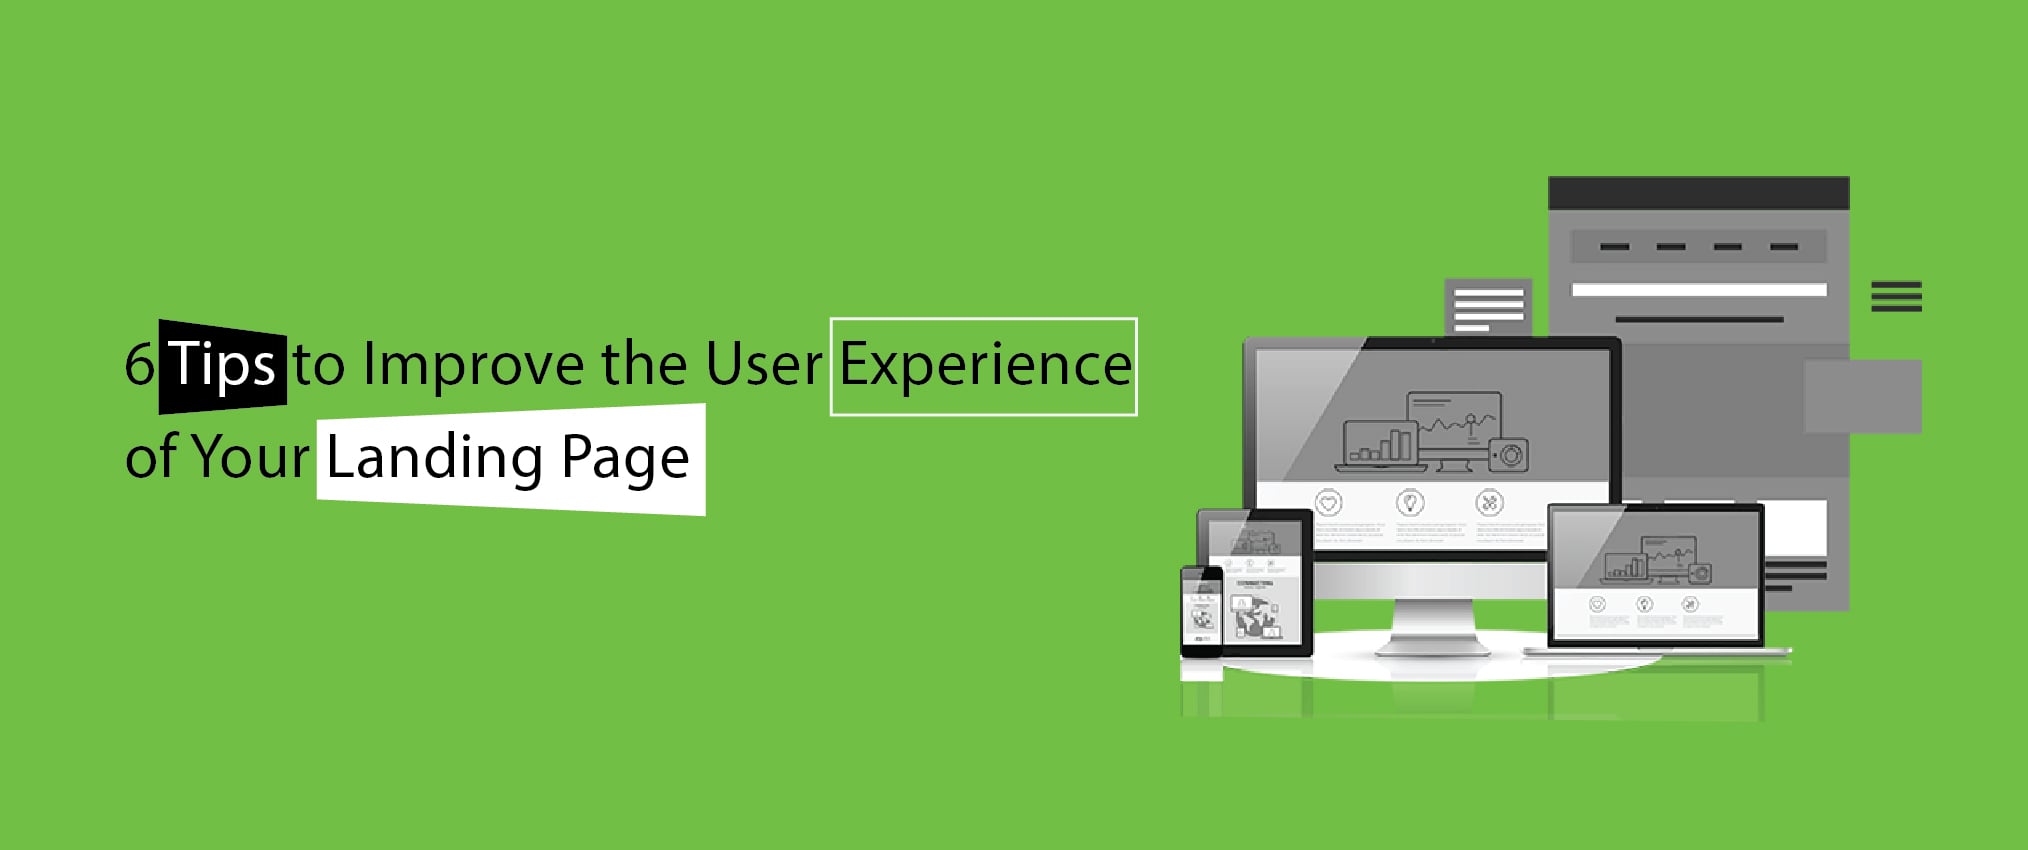 TIPS TO IMPROVE THE USER EXPERIENCE OF YOUR LANDING PAGE